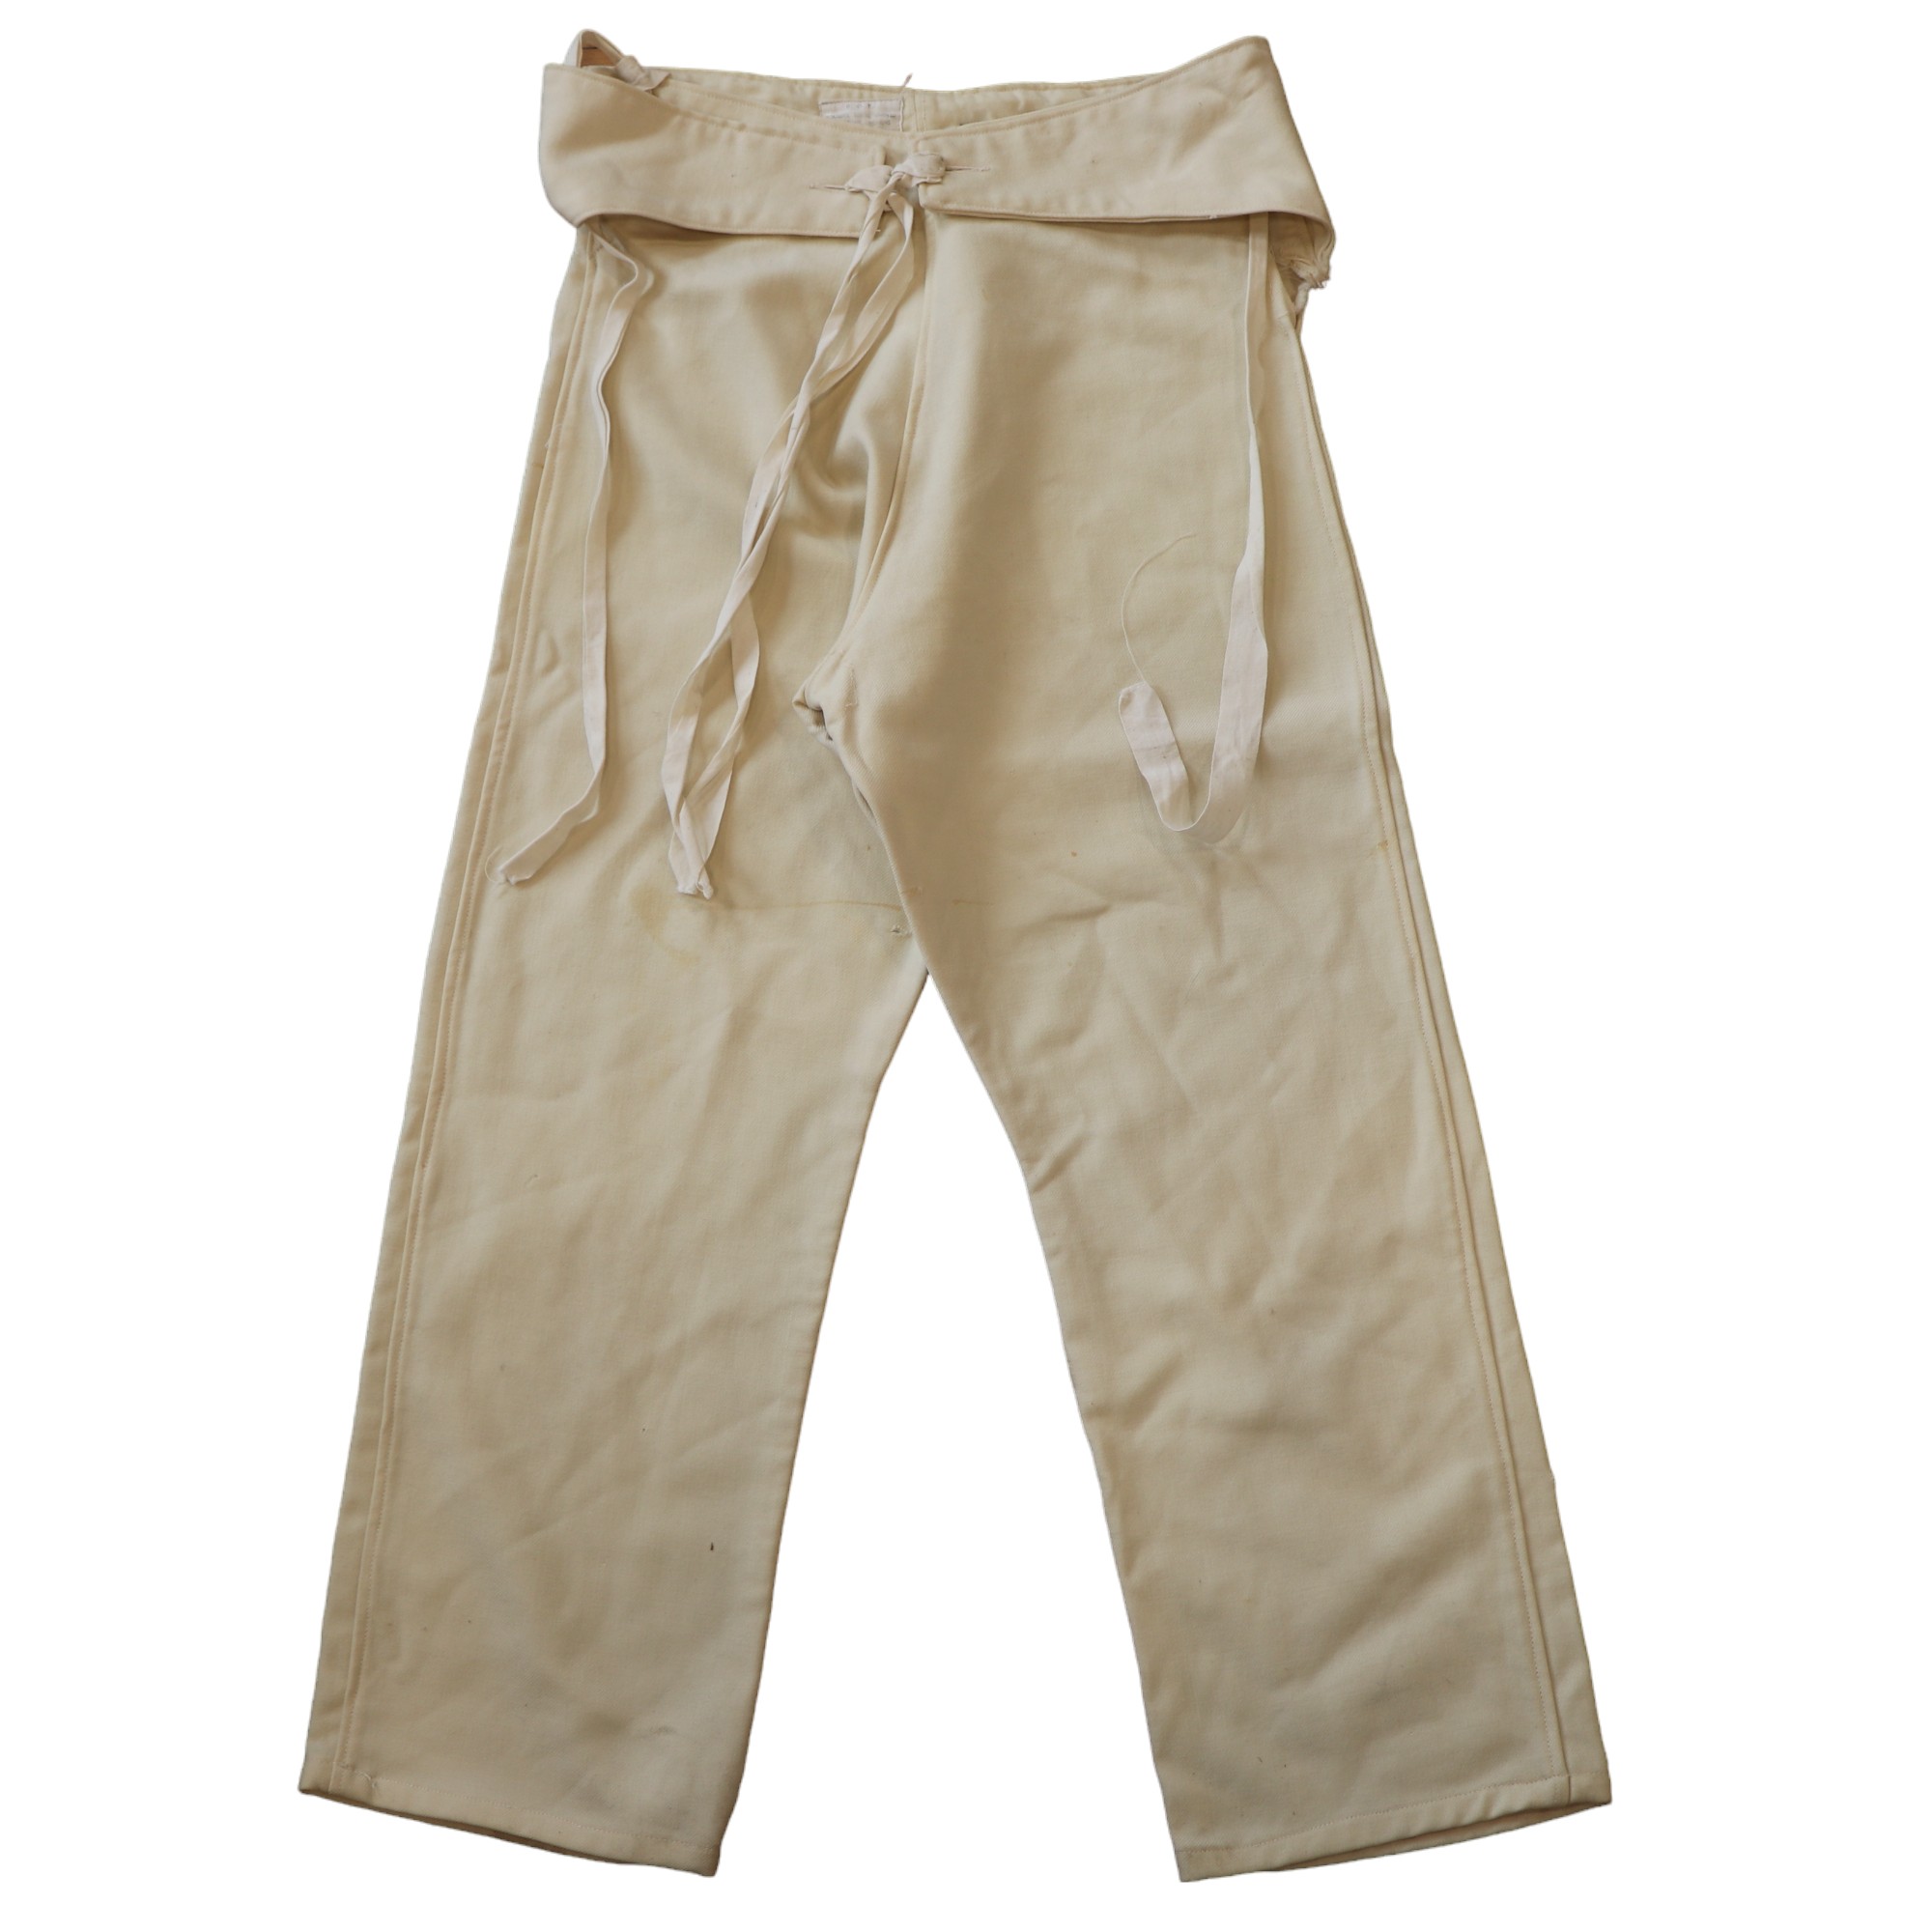 A pair of 1942 British munition worker's Royal Ordnance Factory Women's Serge Undyed Trousers